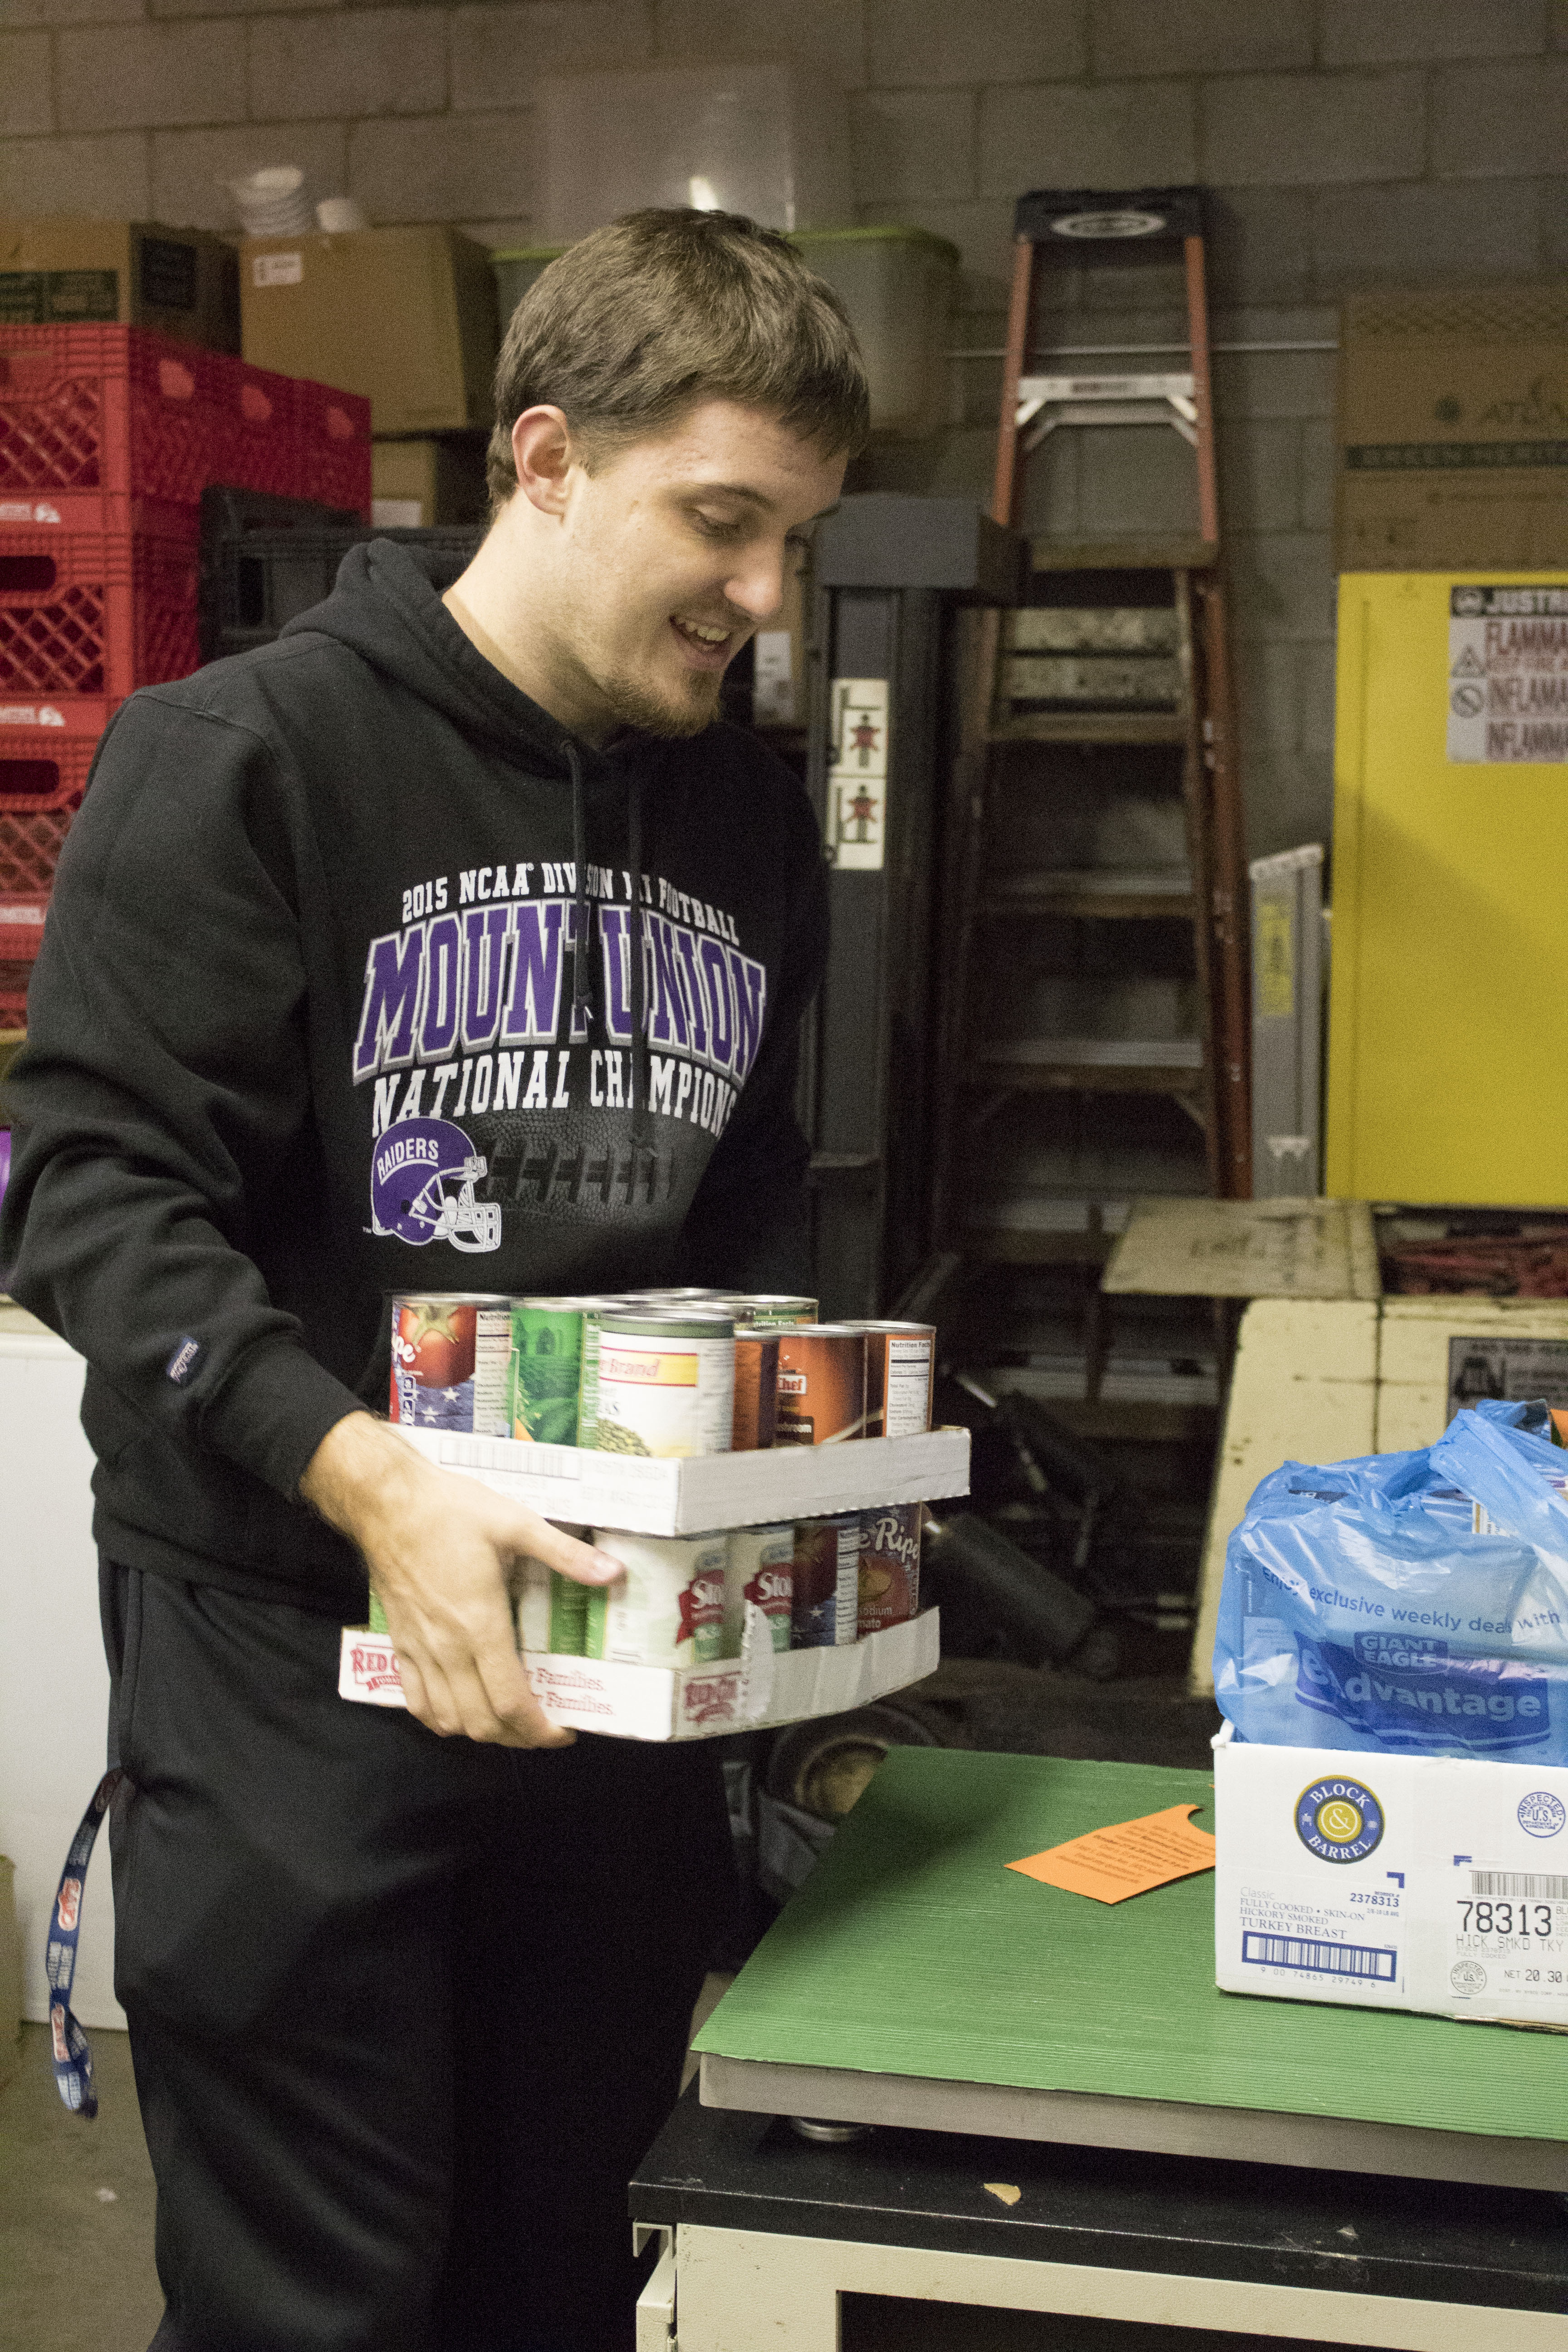 Mount Union Students Trick-or-Treating for Canned Goods on Halloween